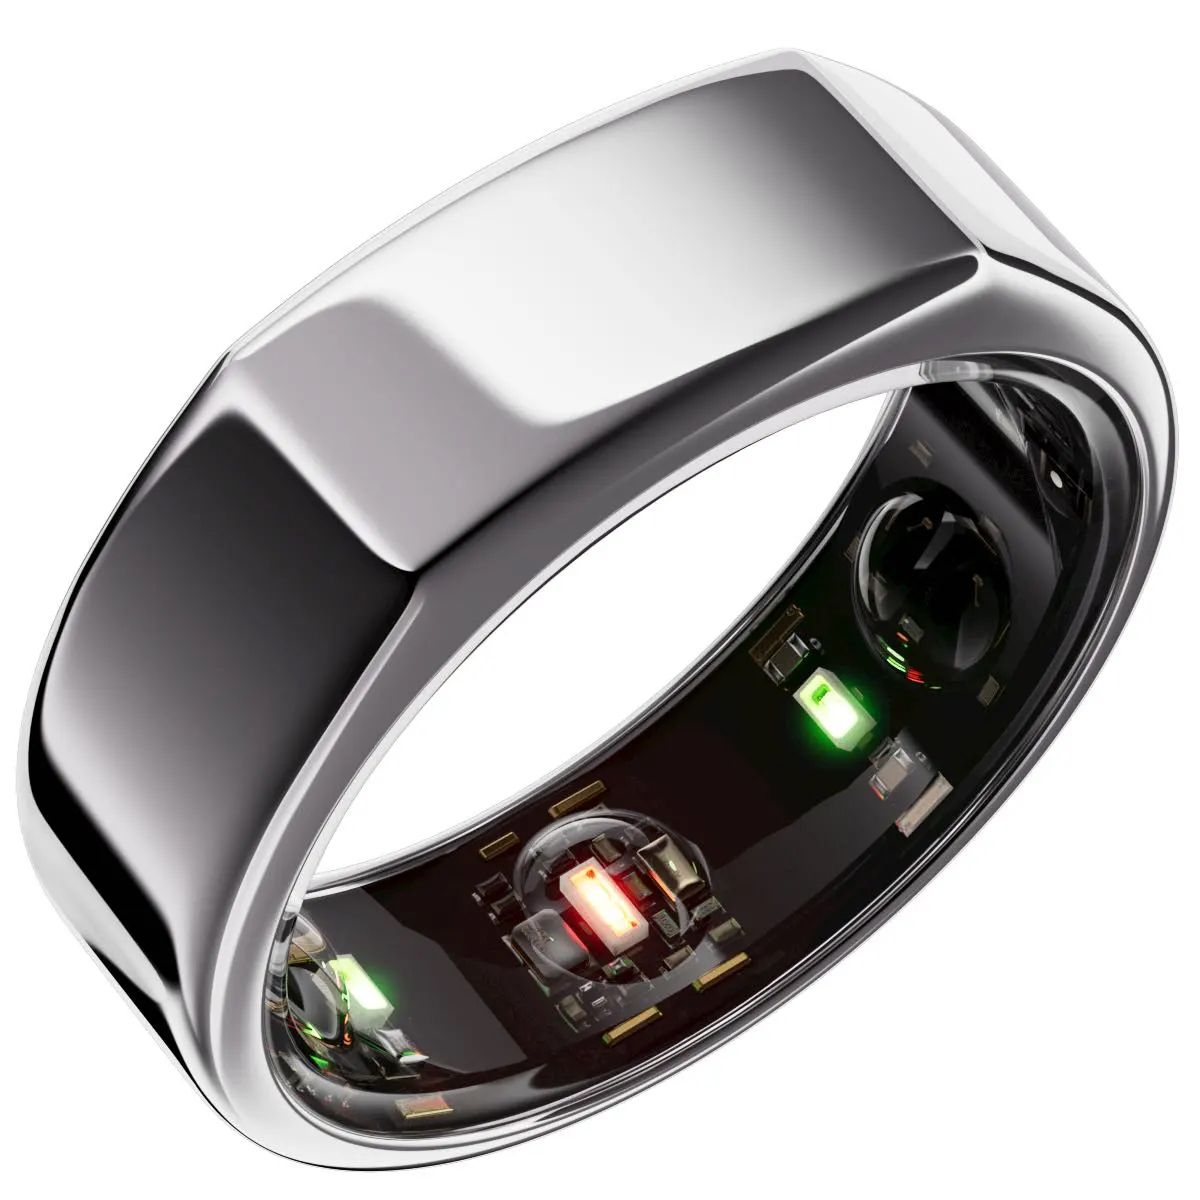 Wearable technology reviews, news and features - Wareable